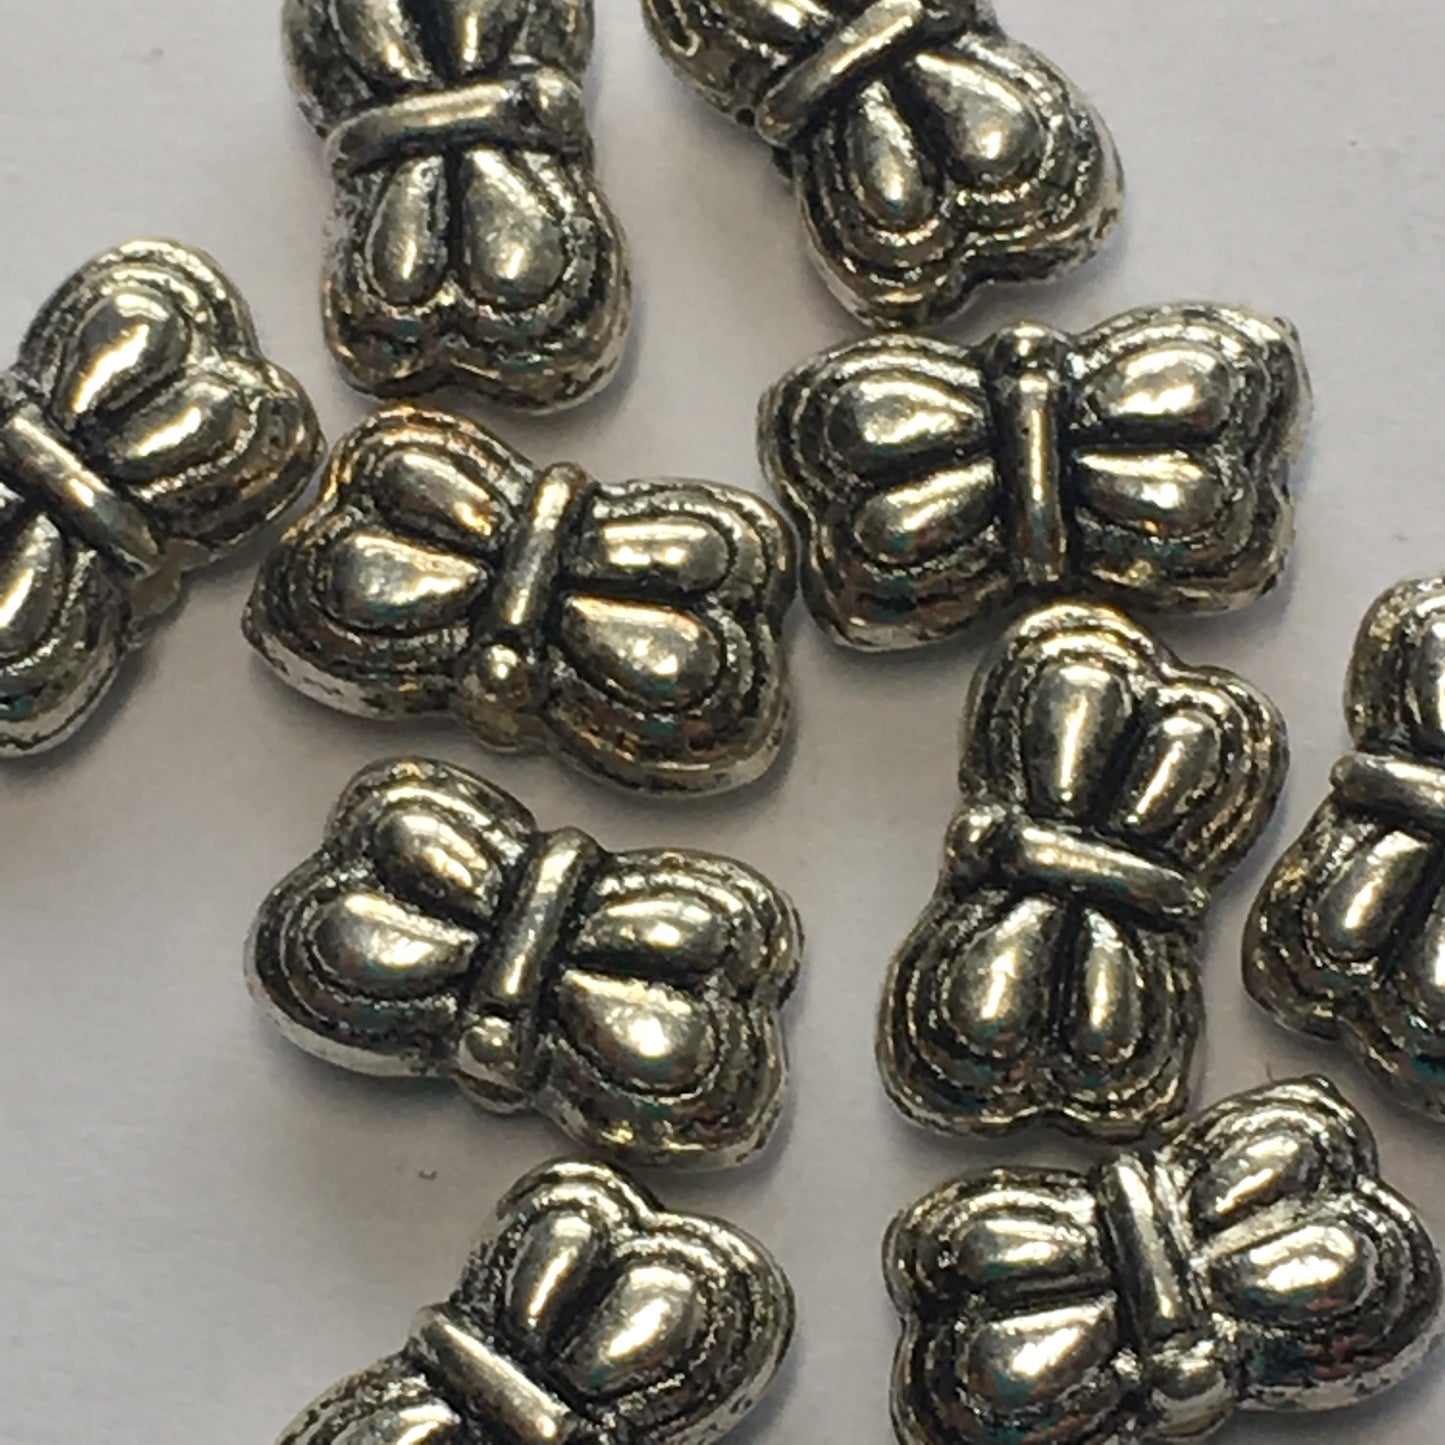 Antique Silver Butterfly Beads, 5 x 9 mm - 5 or 10 Beads